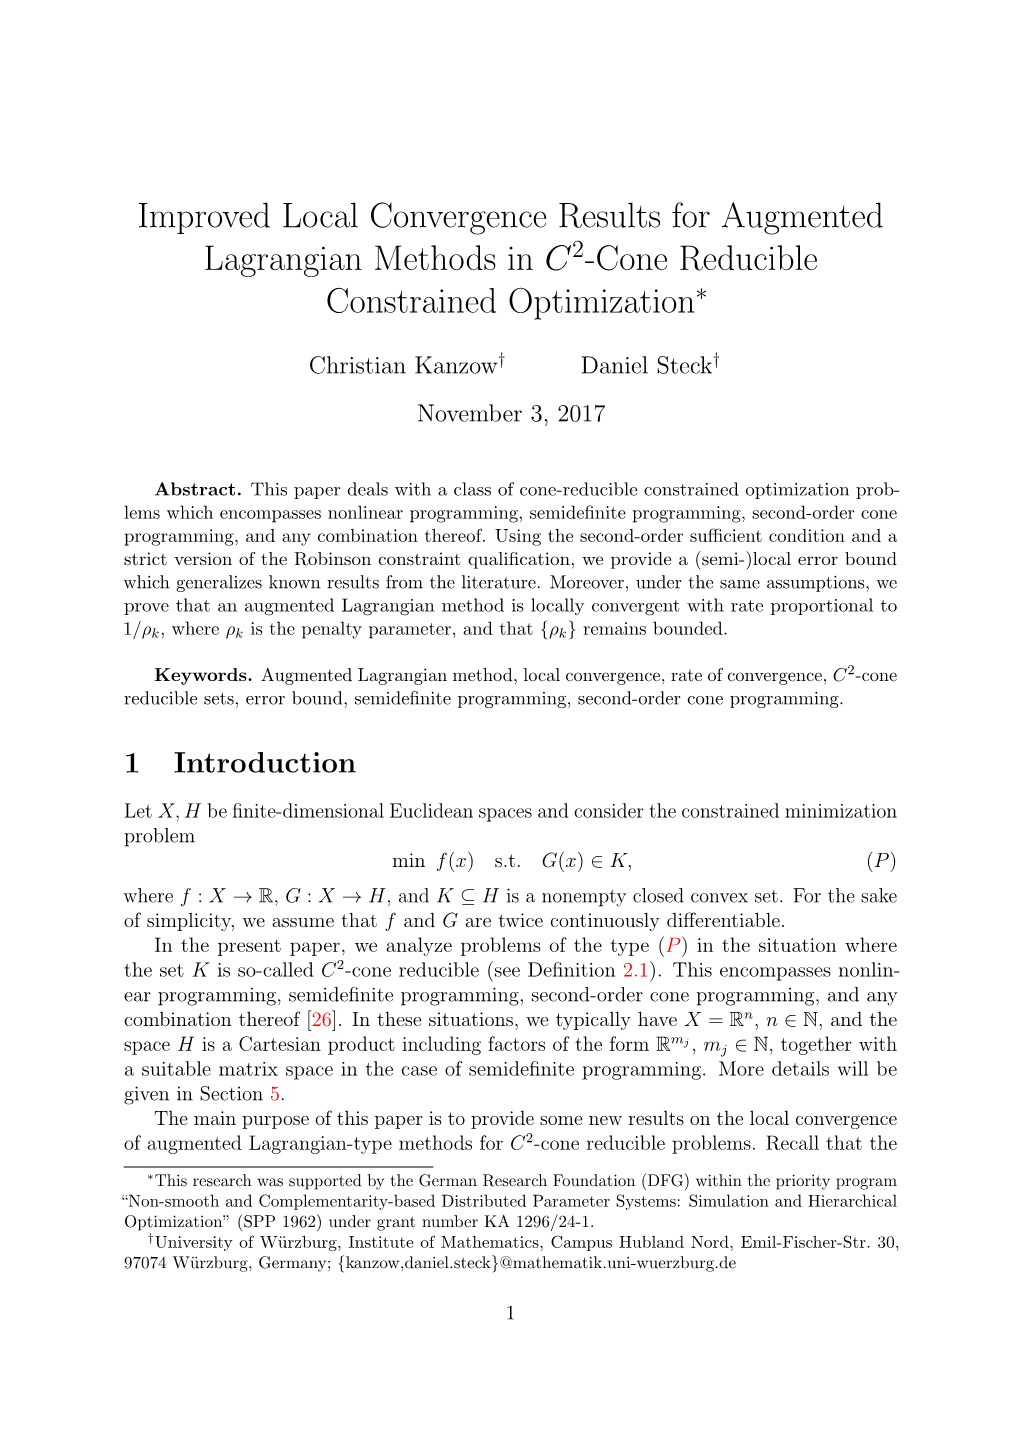 Improved Local Convergence Results for Augmented Lagrangian Methods in C -Cone Reducible Constrained Optimization